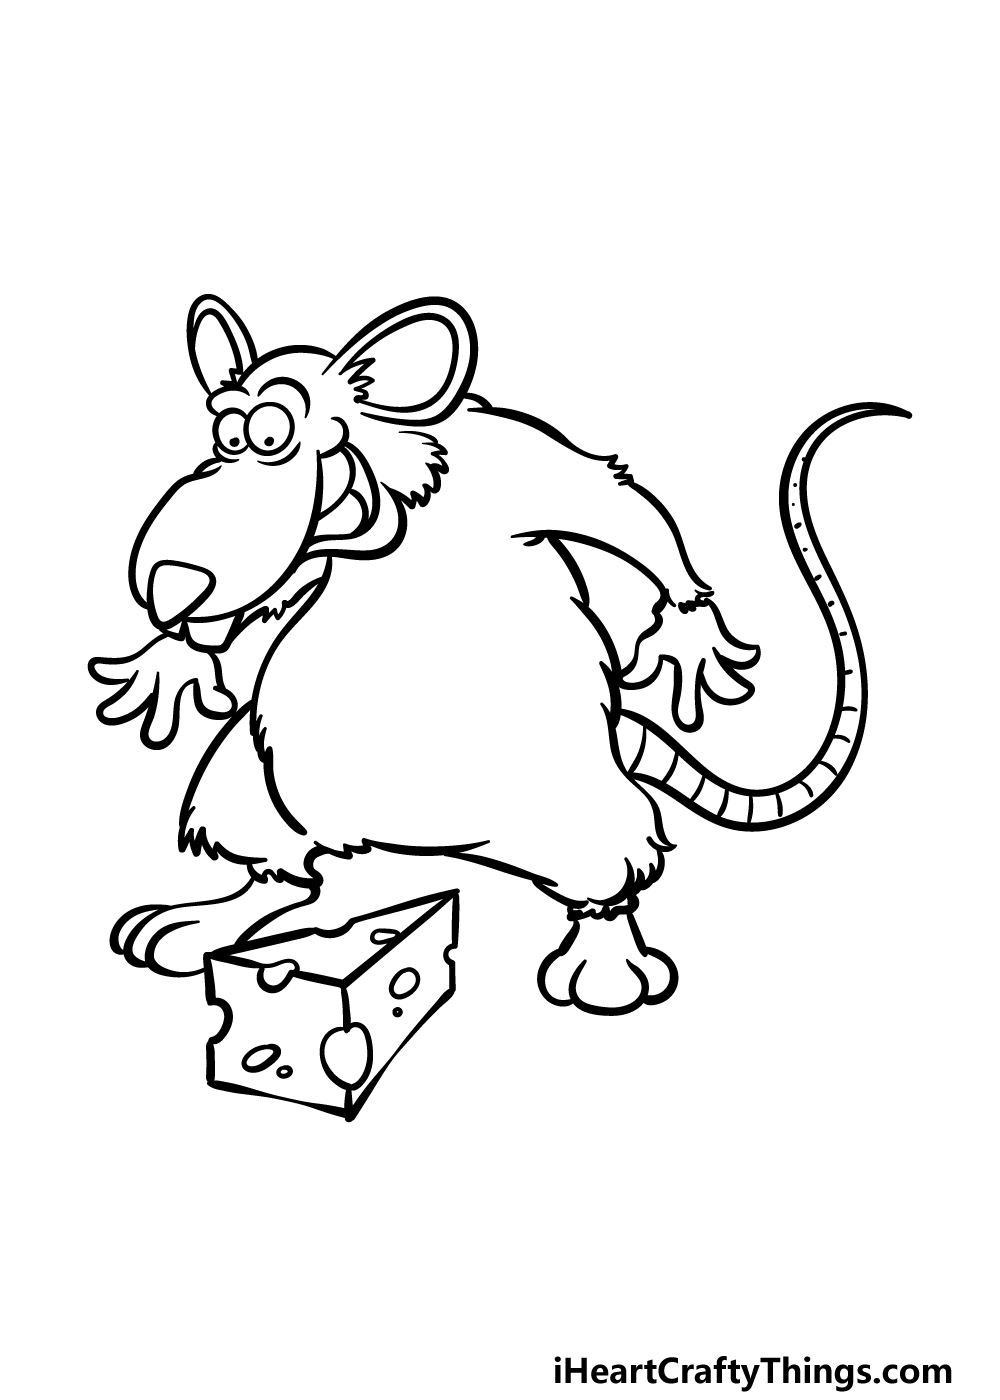 Rat Drawing - How To Draw A Rat Step By Step